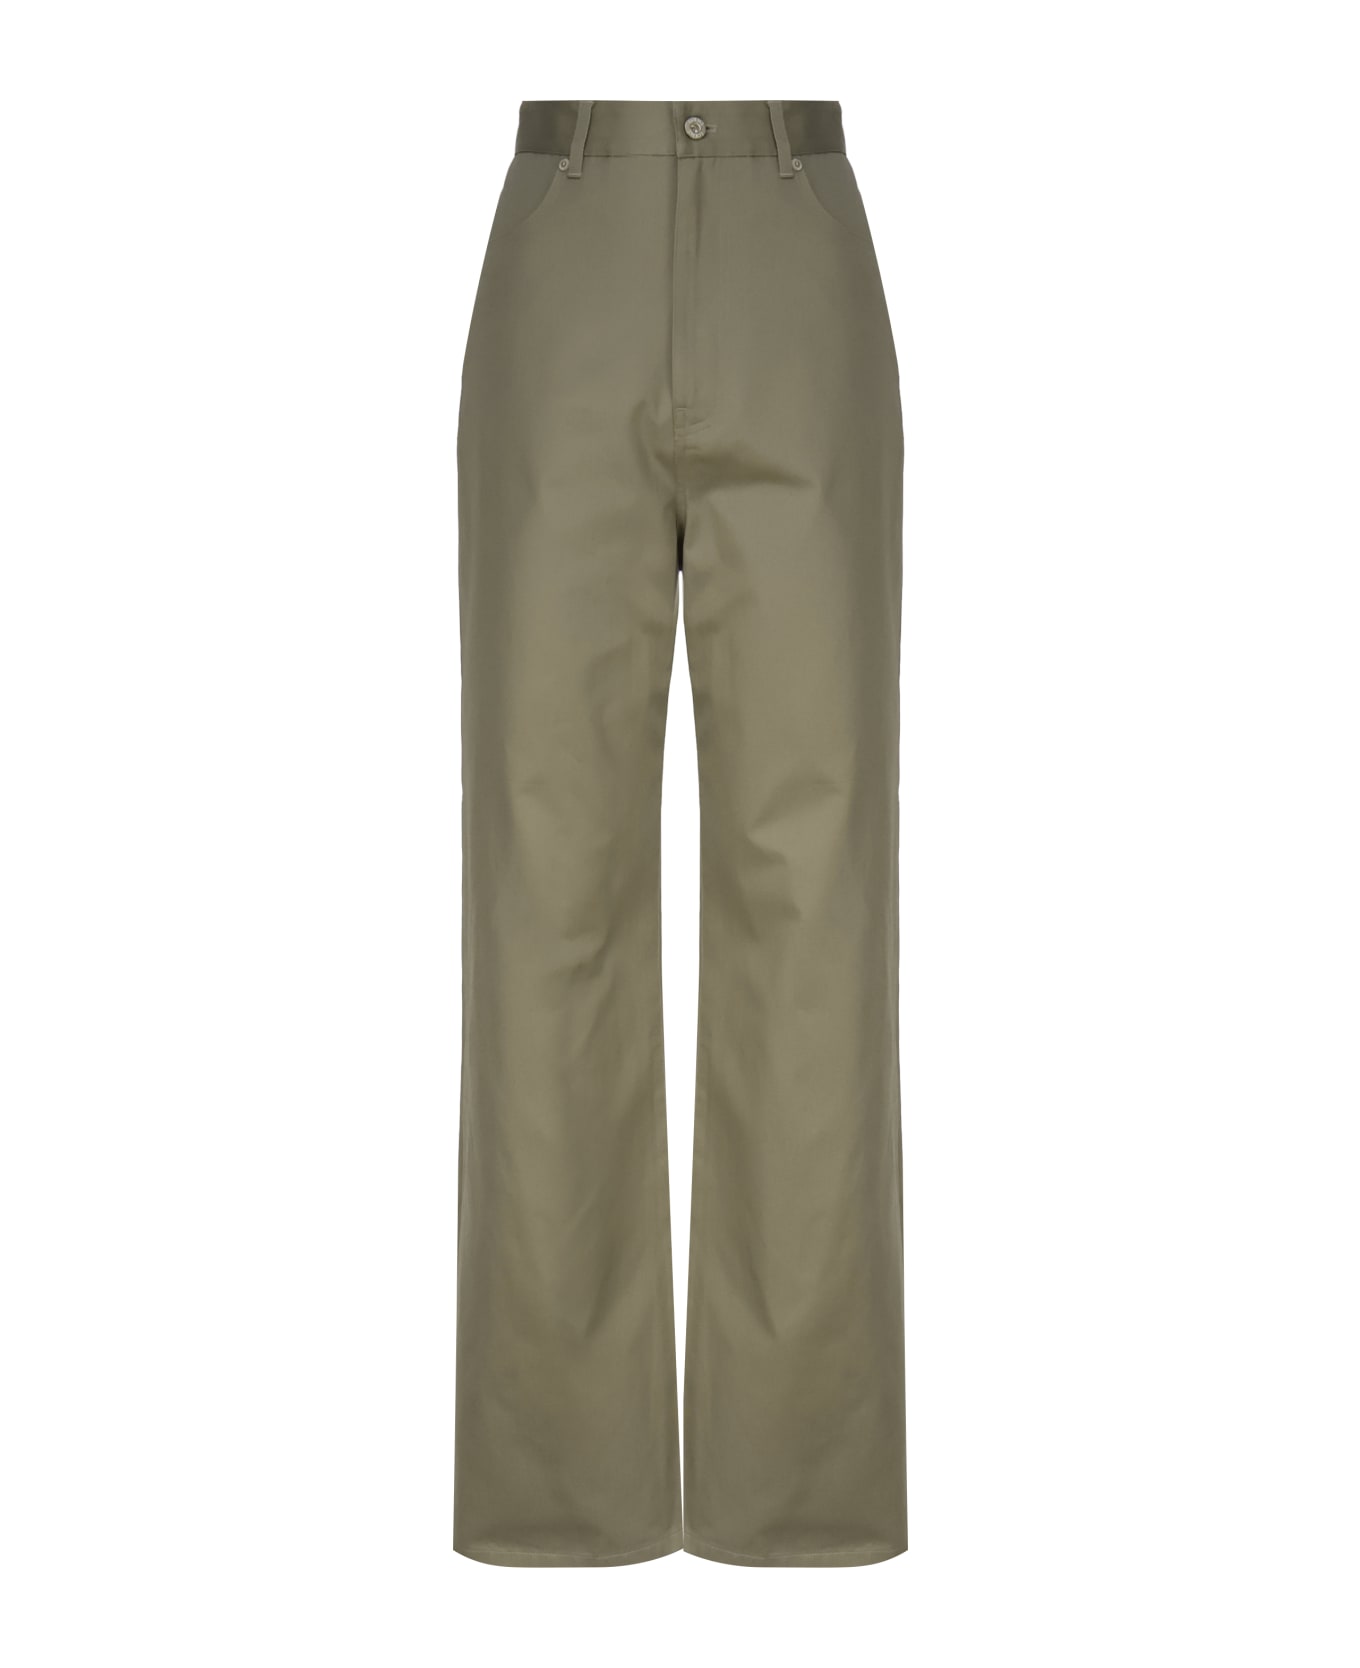 Loewe Logo Patch High-waisted Trousers - Military green ボトムス